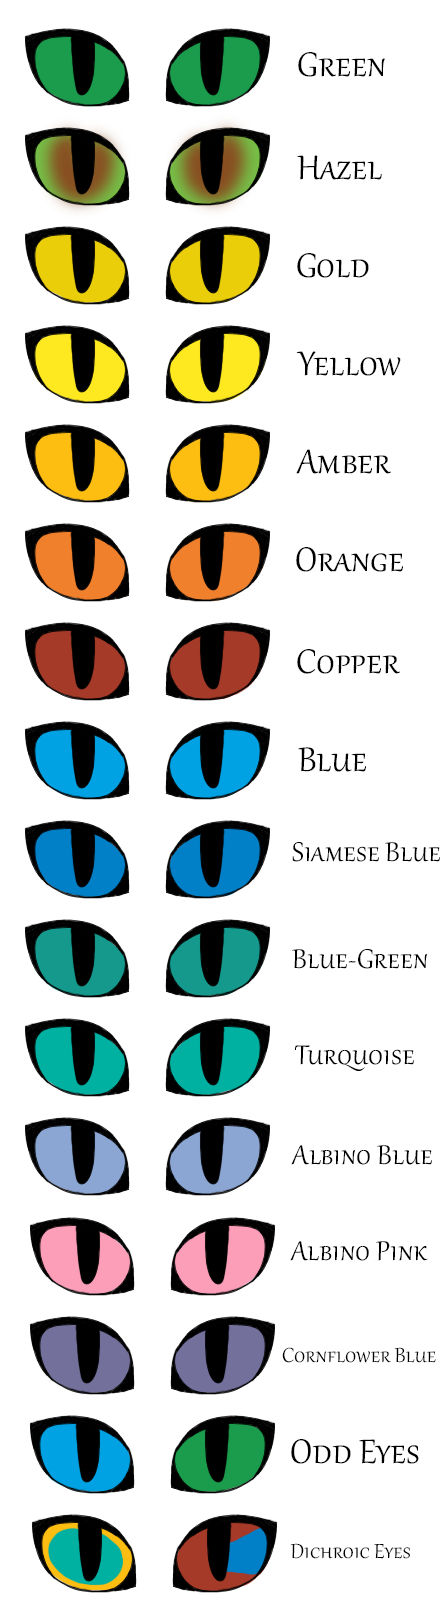 Eye Color Guide for A-Gathering by BluYondr on DeviantArt